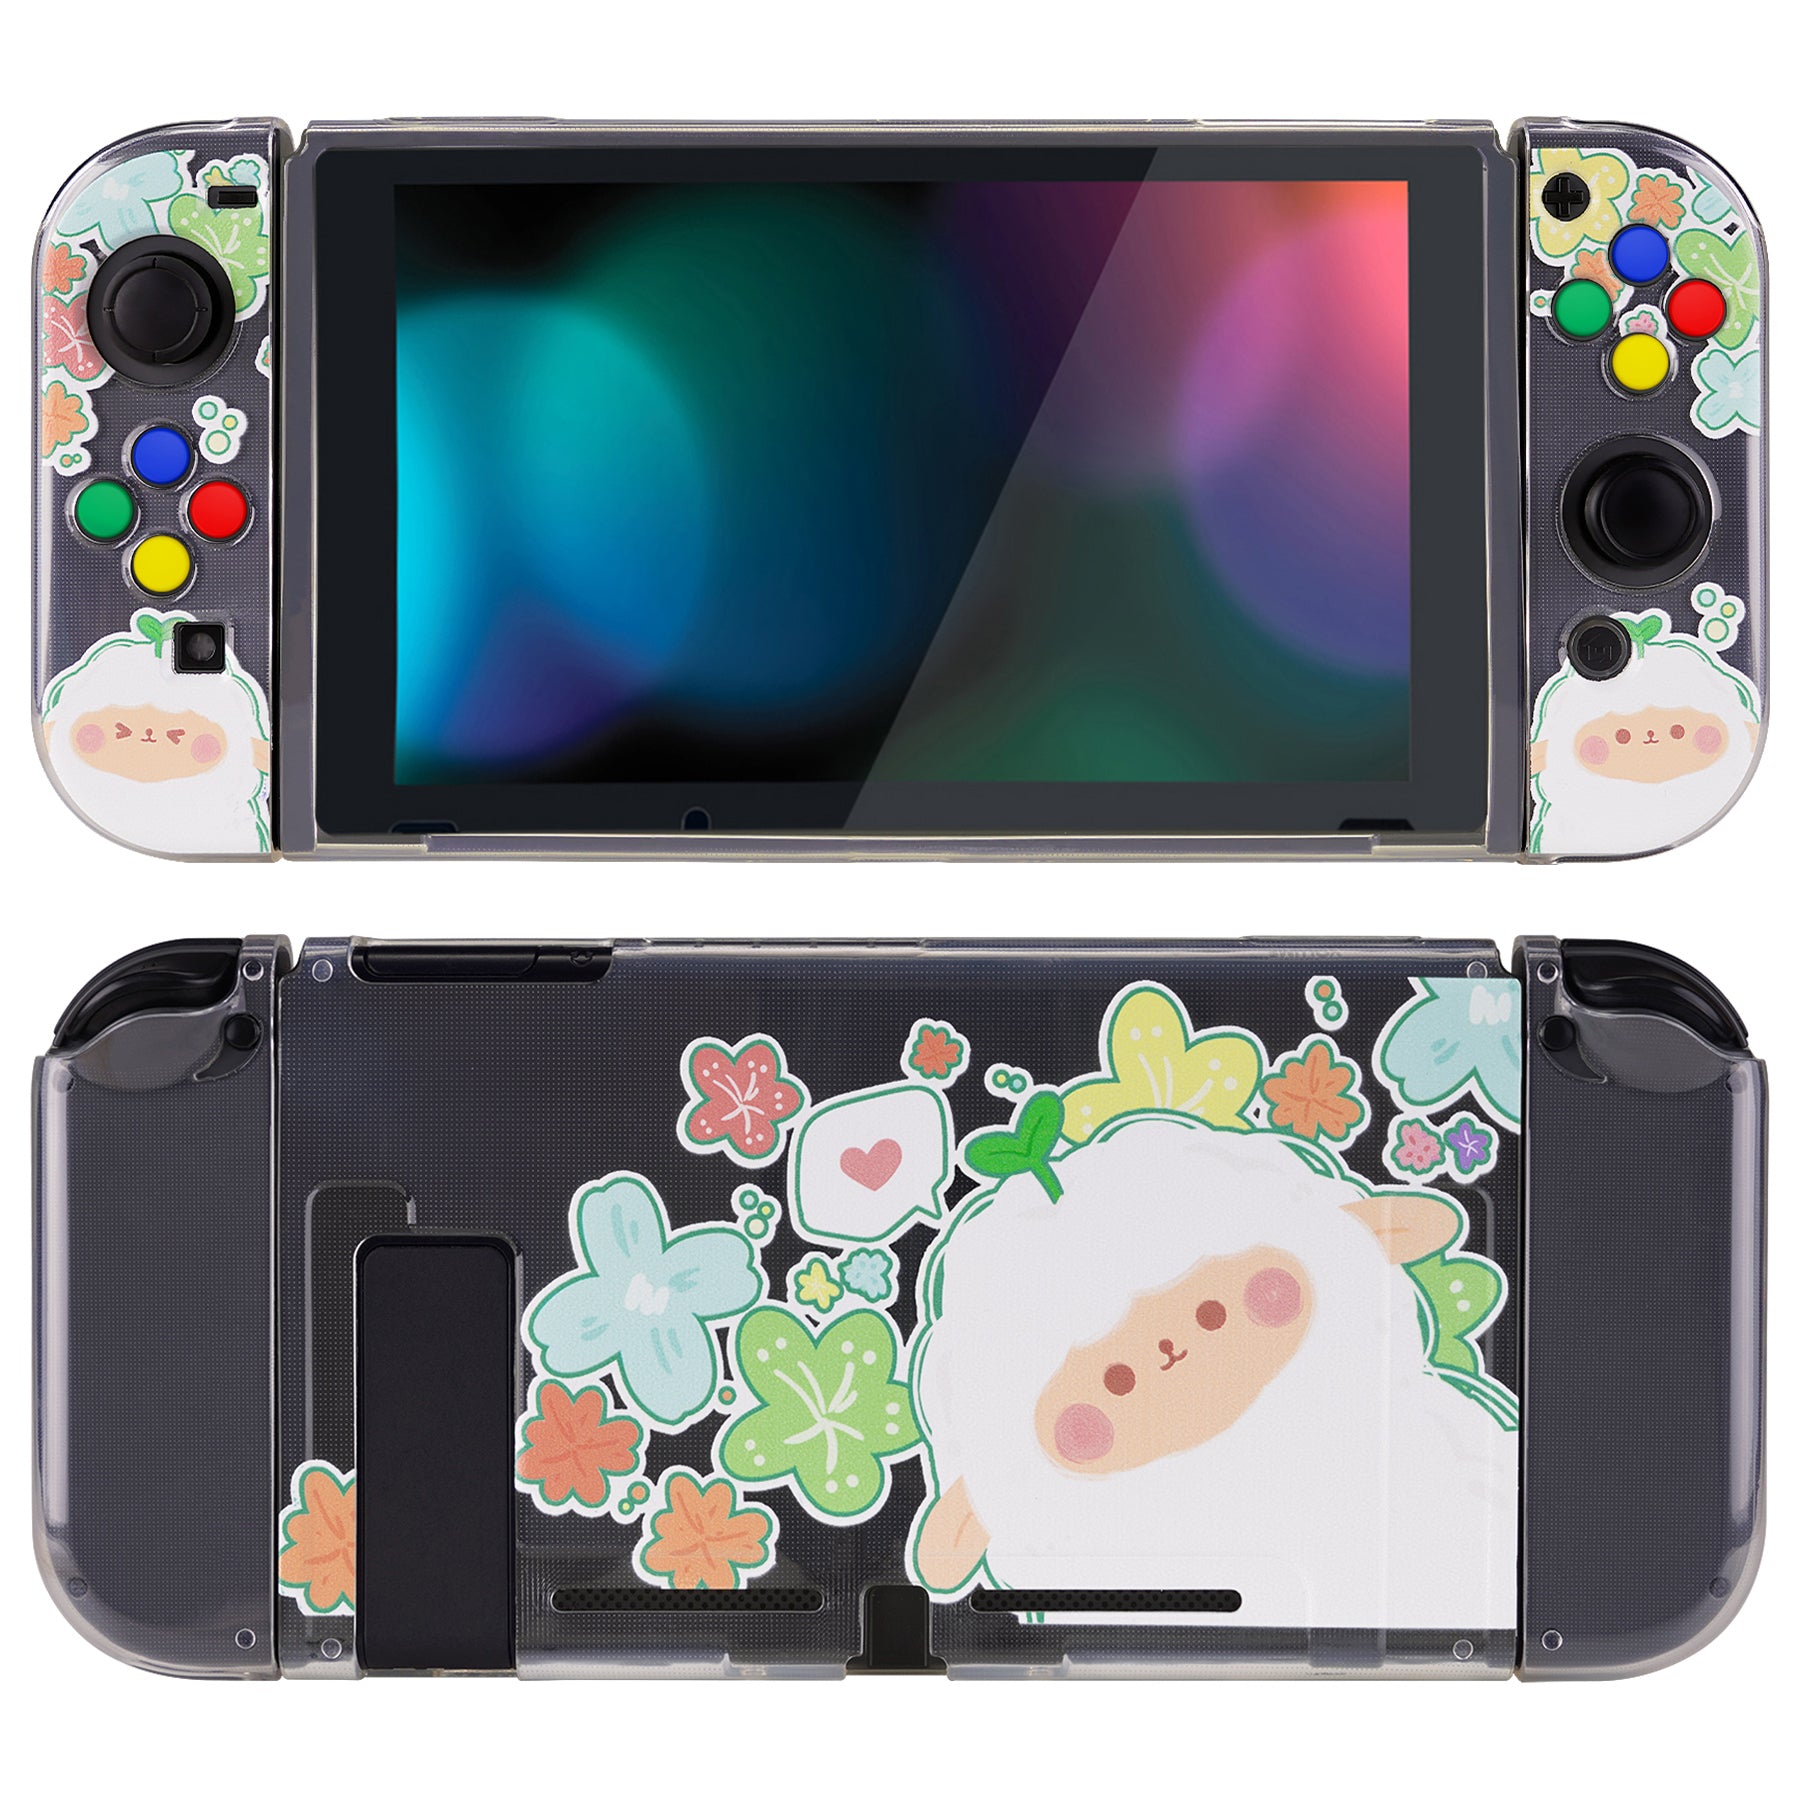 Back Case Housing Shell Animal Crossing for Nintendo Switch  Console/Dock/Joy-Con